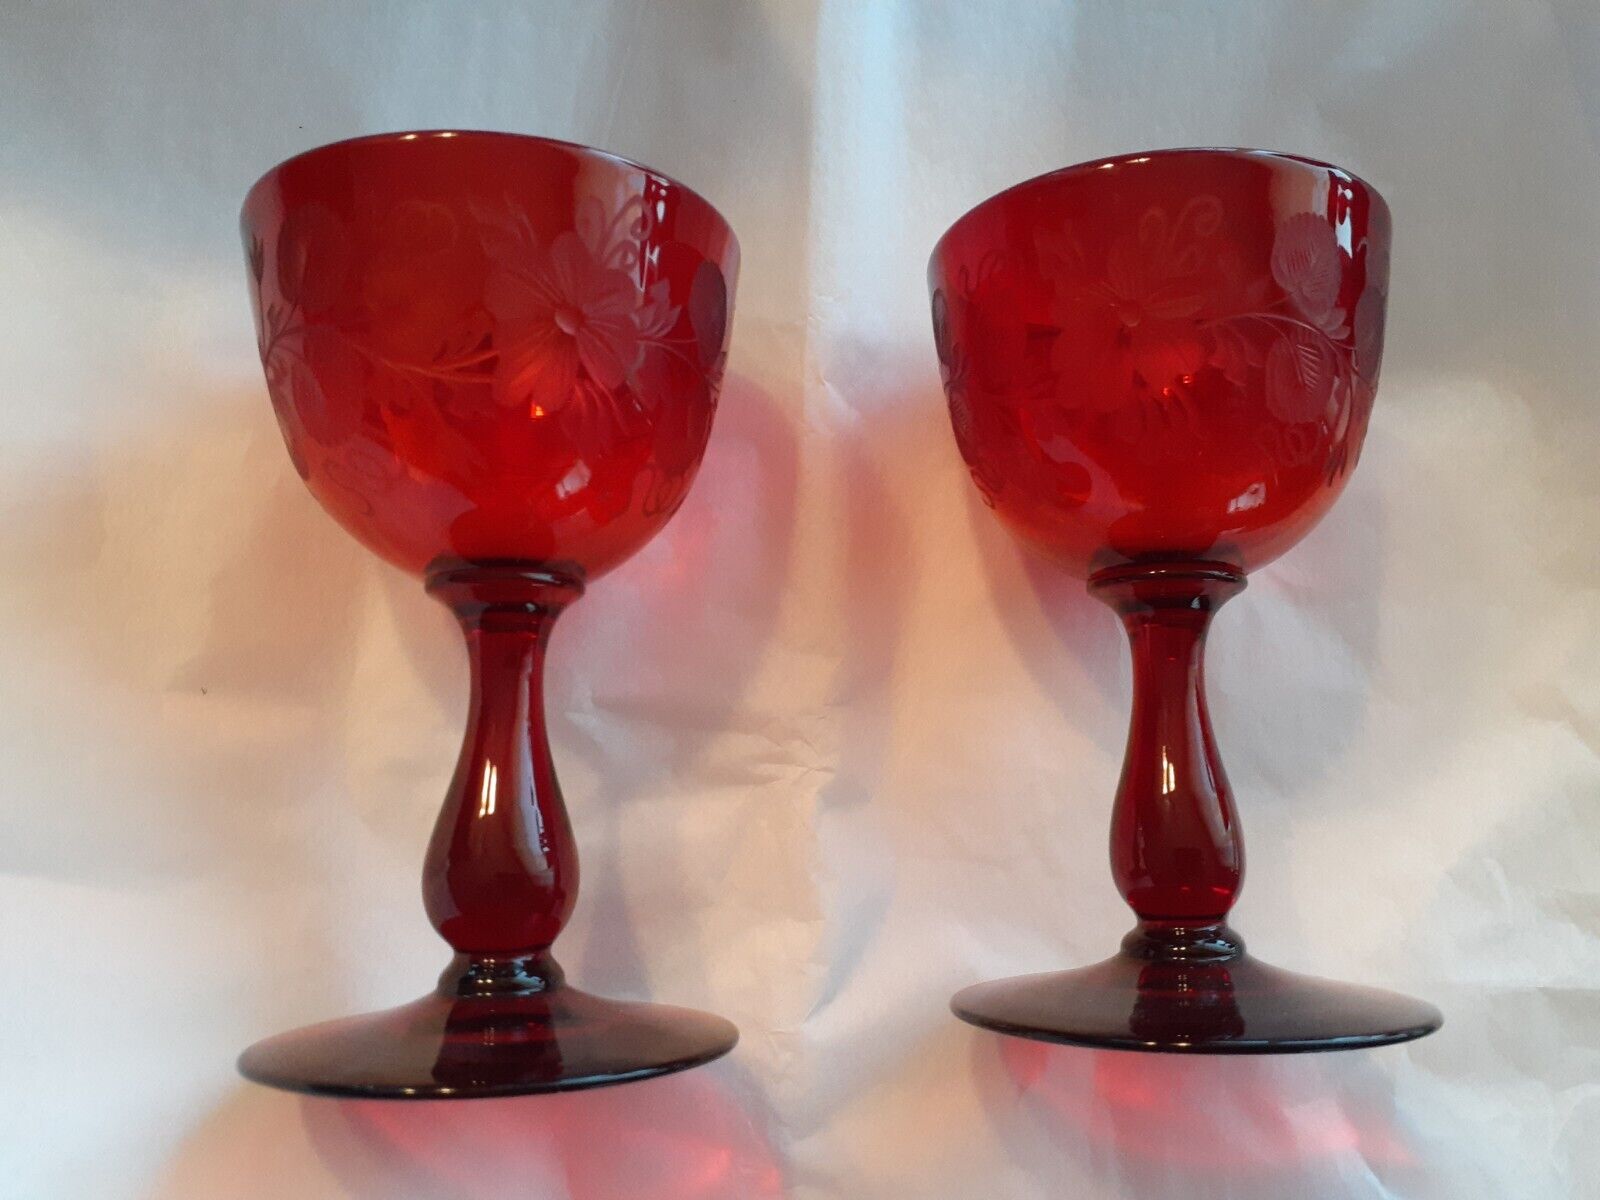  STEUBEN Glass GOBLETS Cardinal red  FREDERICK CARDER lot of 2 RARE Etched